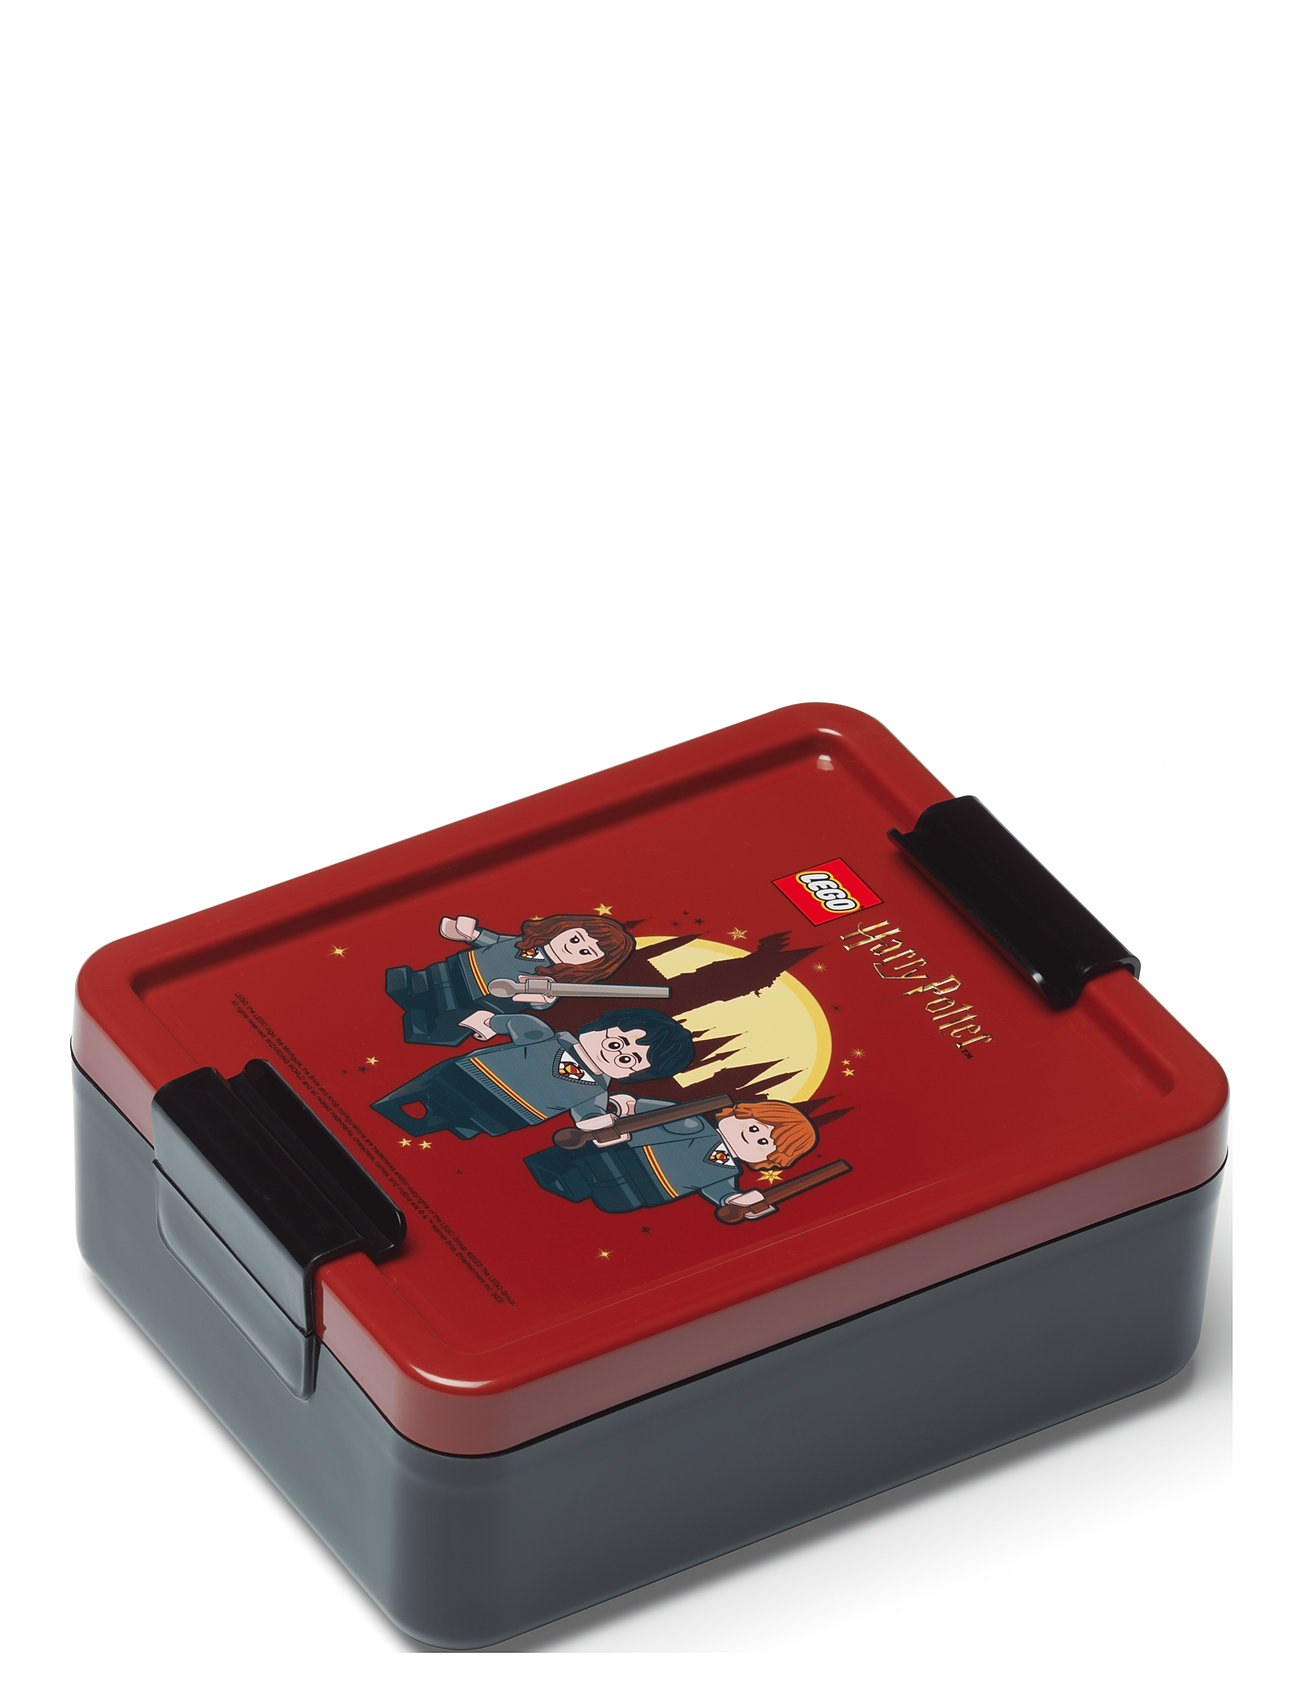 Lego Lunch Box Harry Potter Gryffindor Home Meal Time Lunch Boxes Red LEGO STORAGE